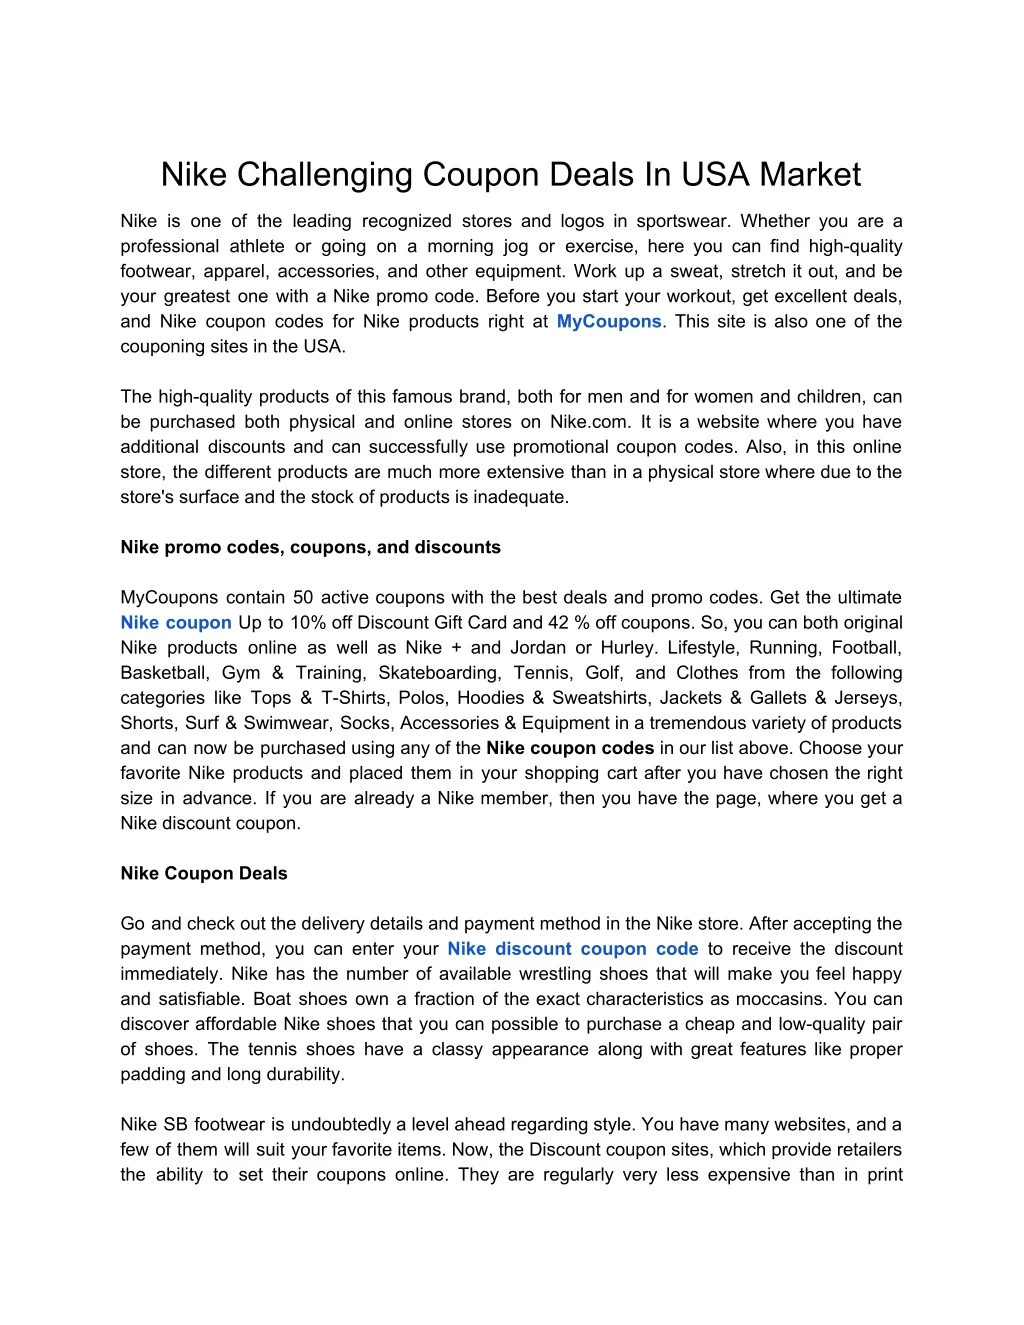 nike challenging coupon deals in usa market